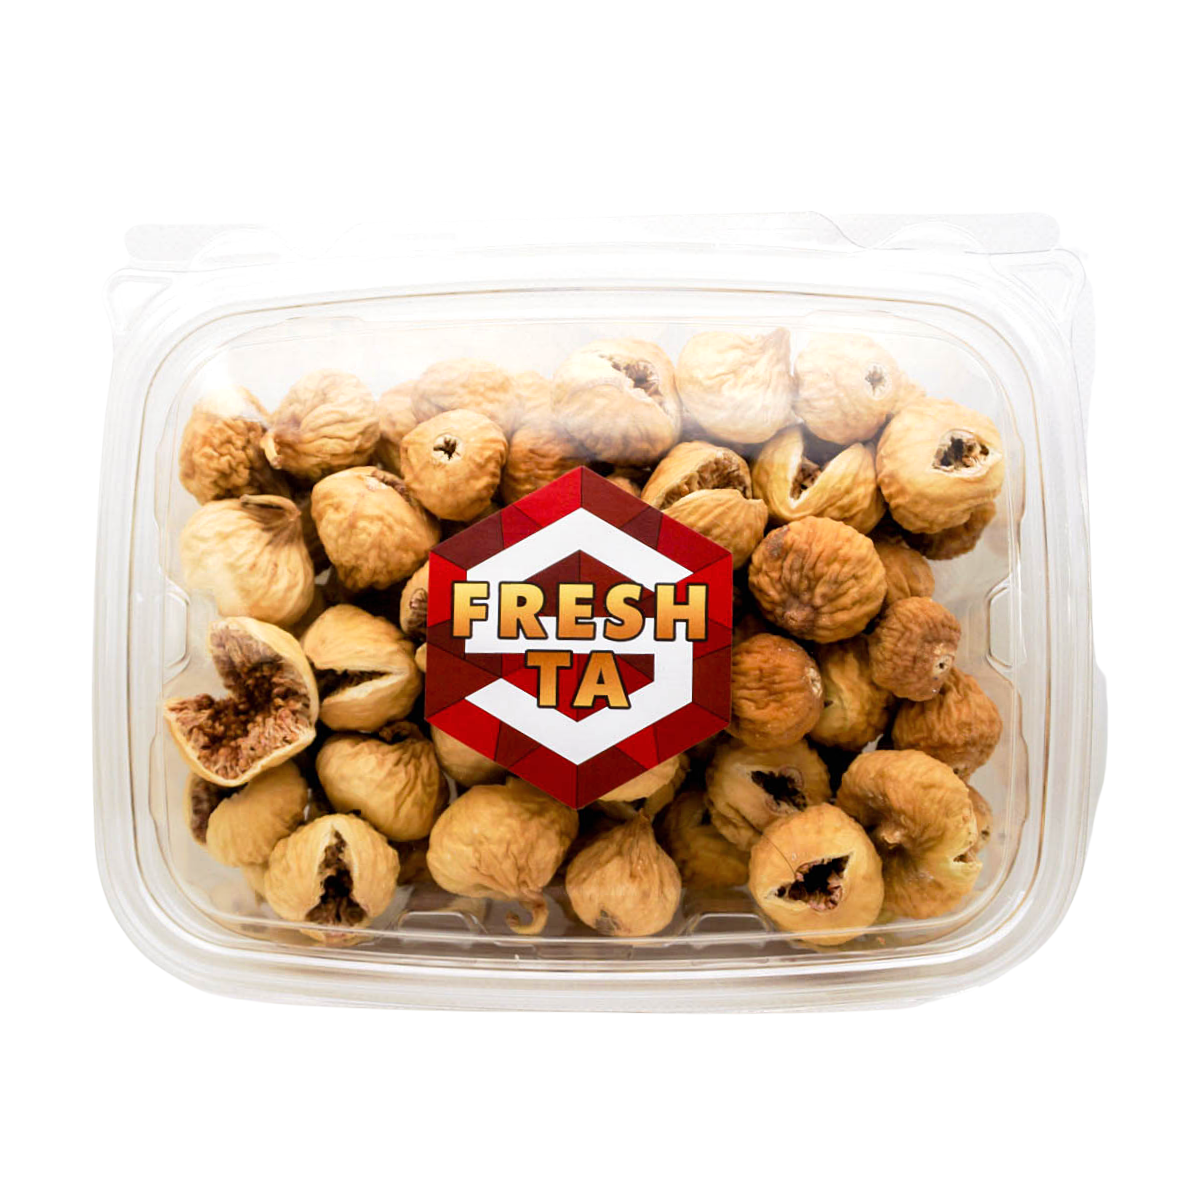 Persian Dried Figs